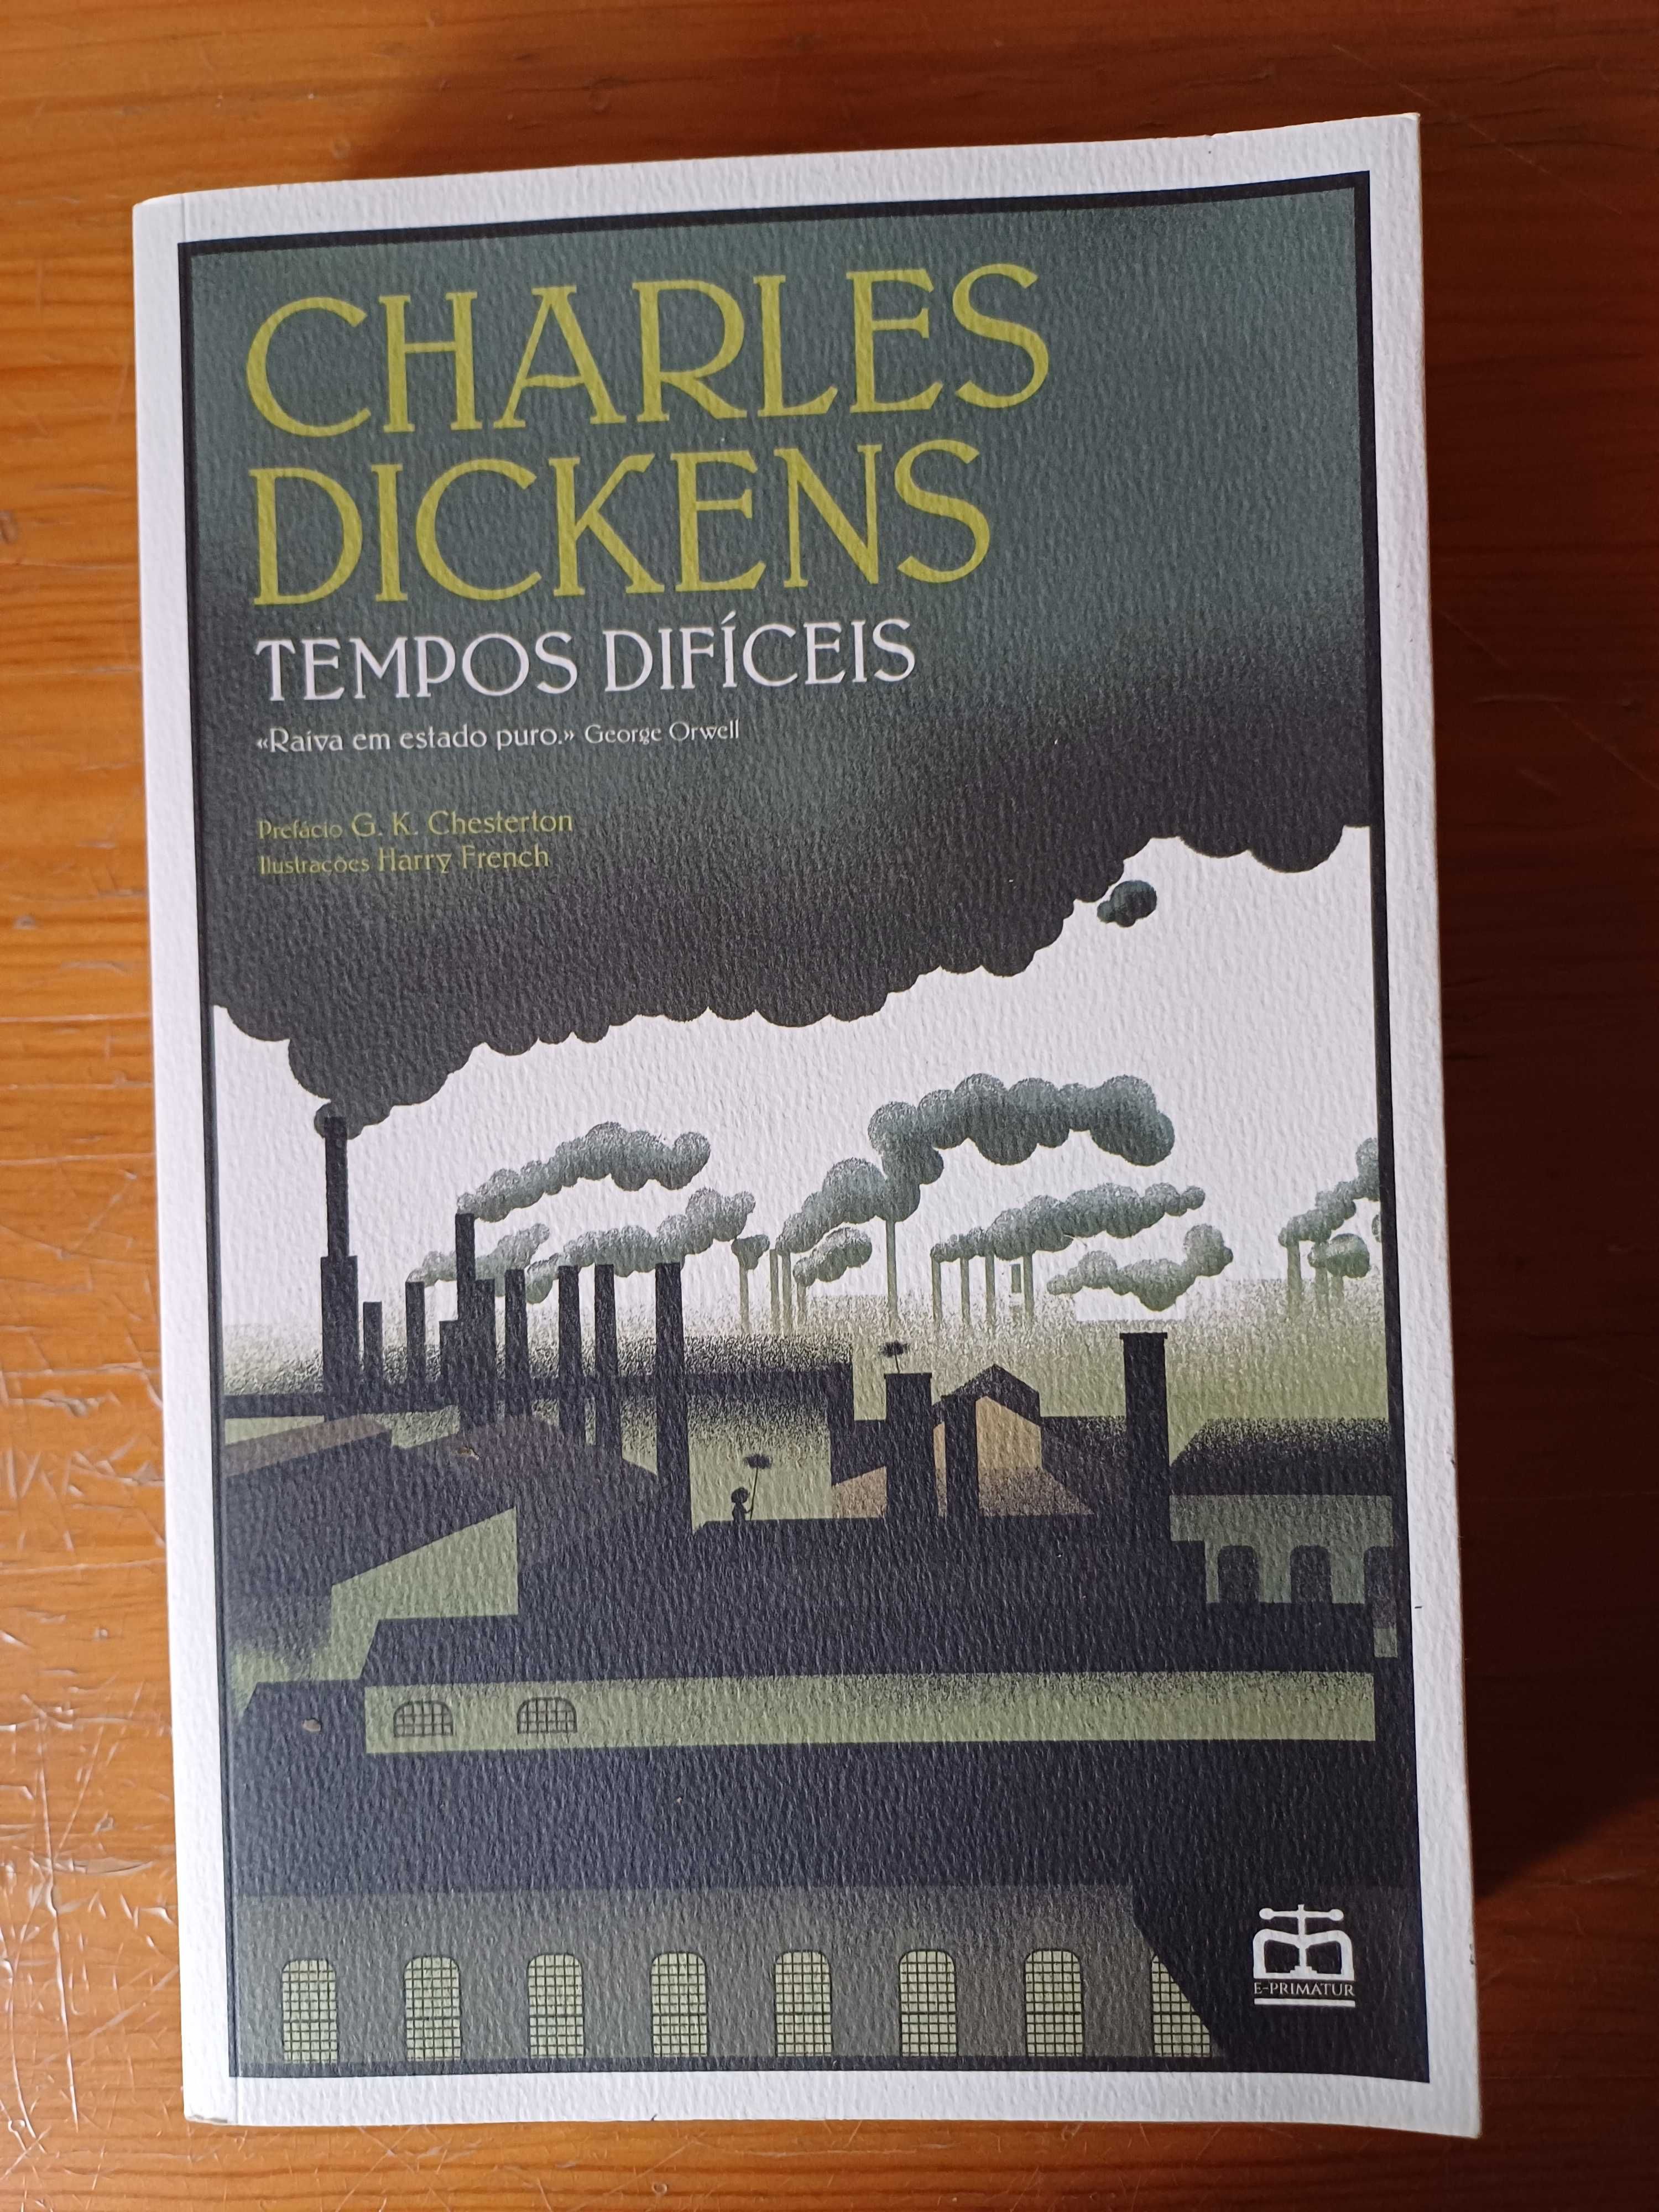 Charles Dickens - Tempos Difíceis